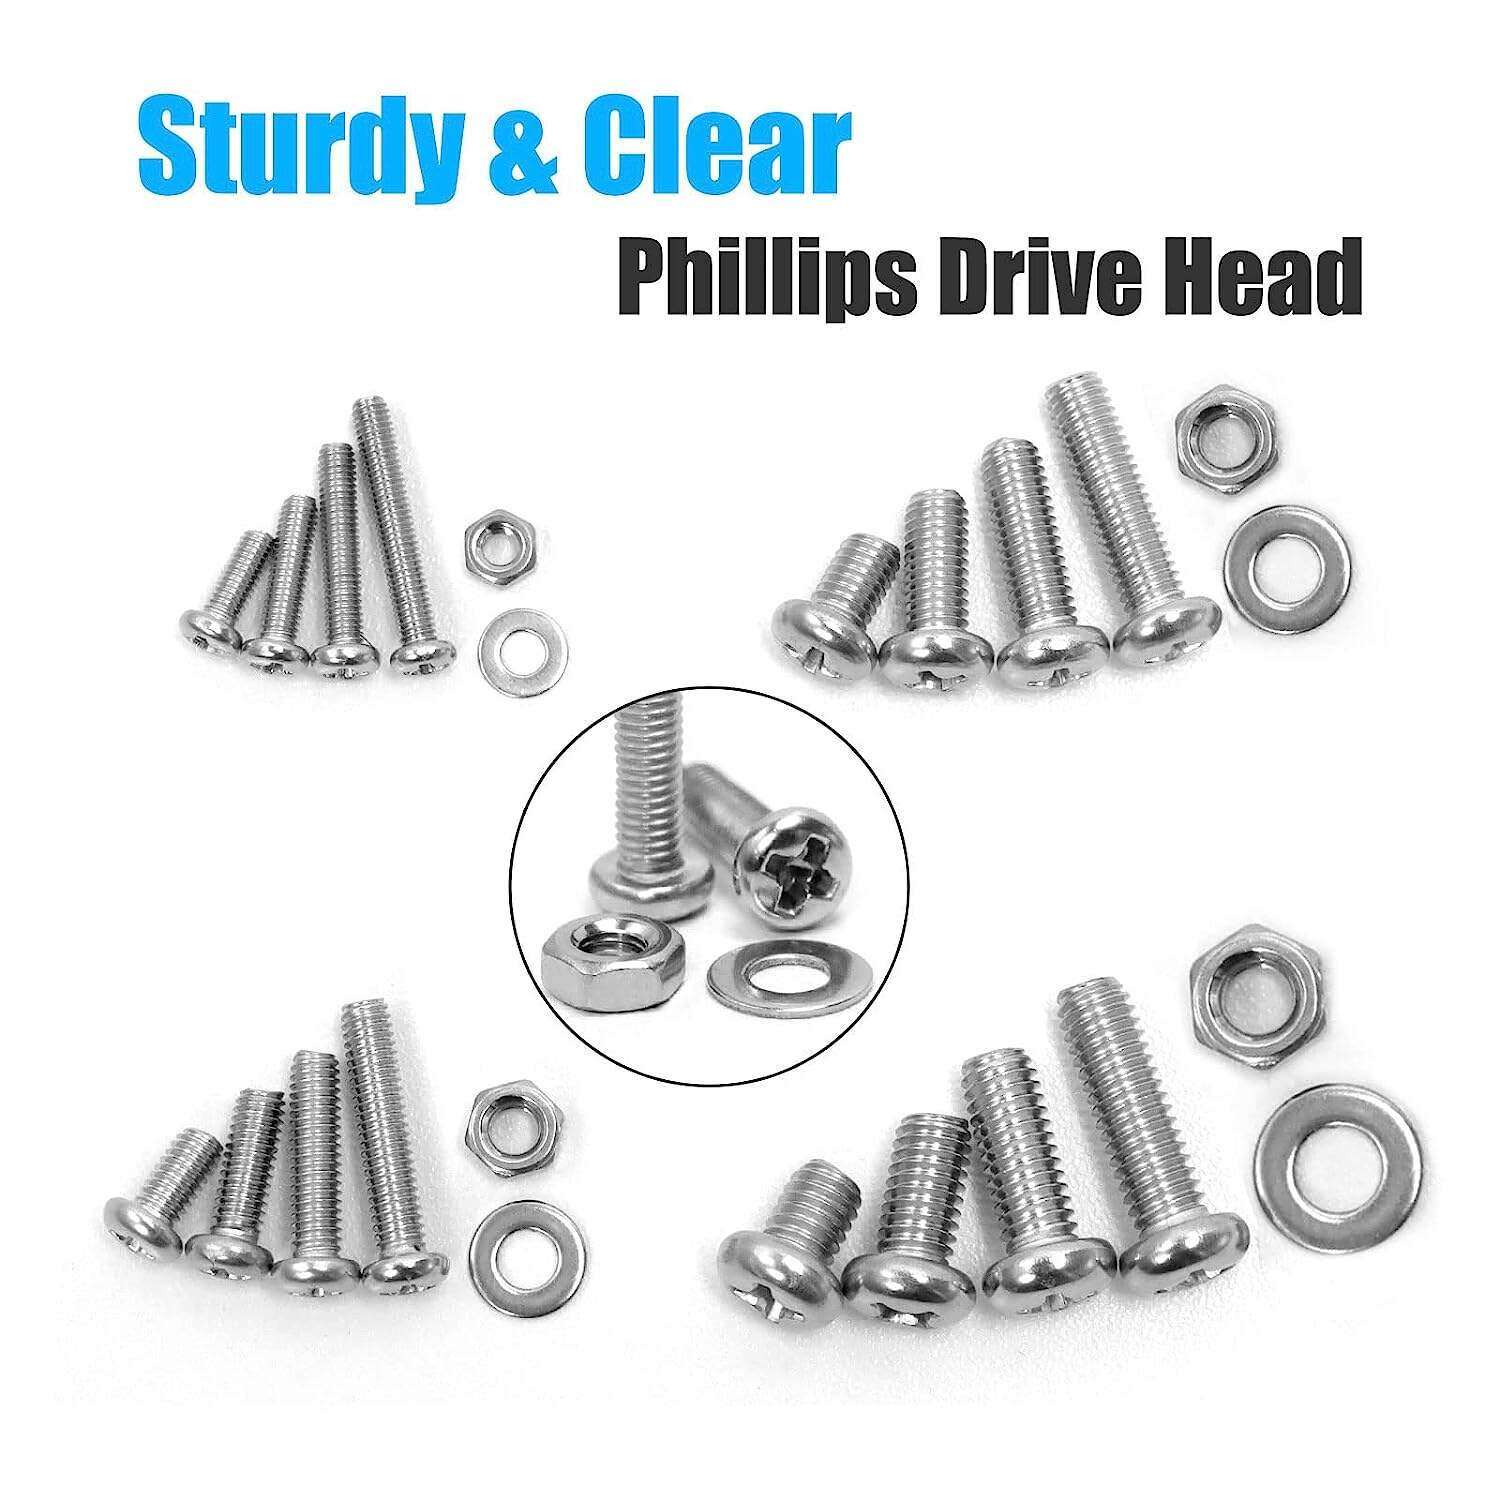 Assorted Cross Pan Head Machine Screws Nuts and Bolts details